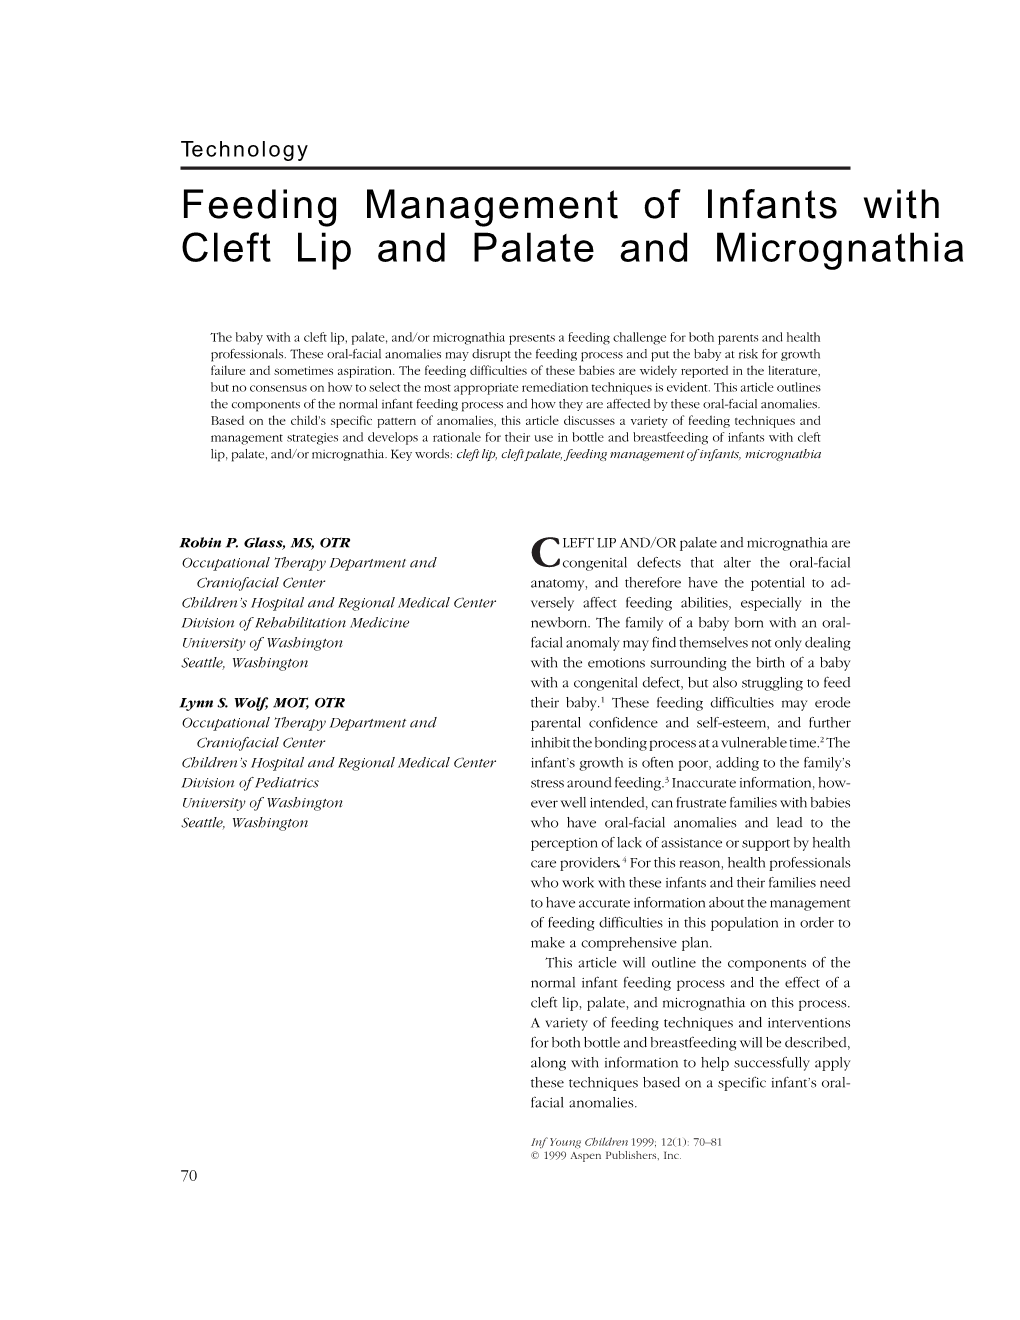 Feeding Management of Infants with Cleft Lip and Palate and Micrognathia